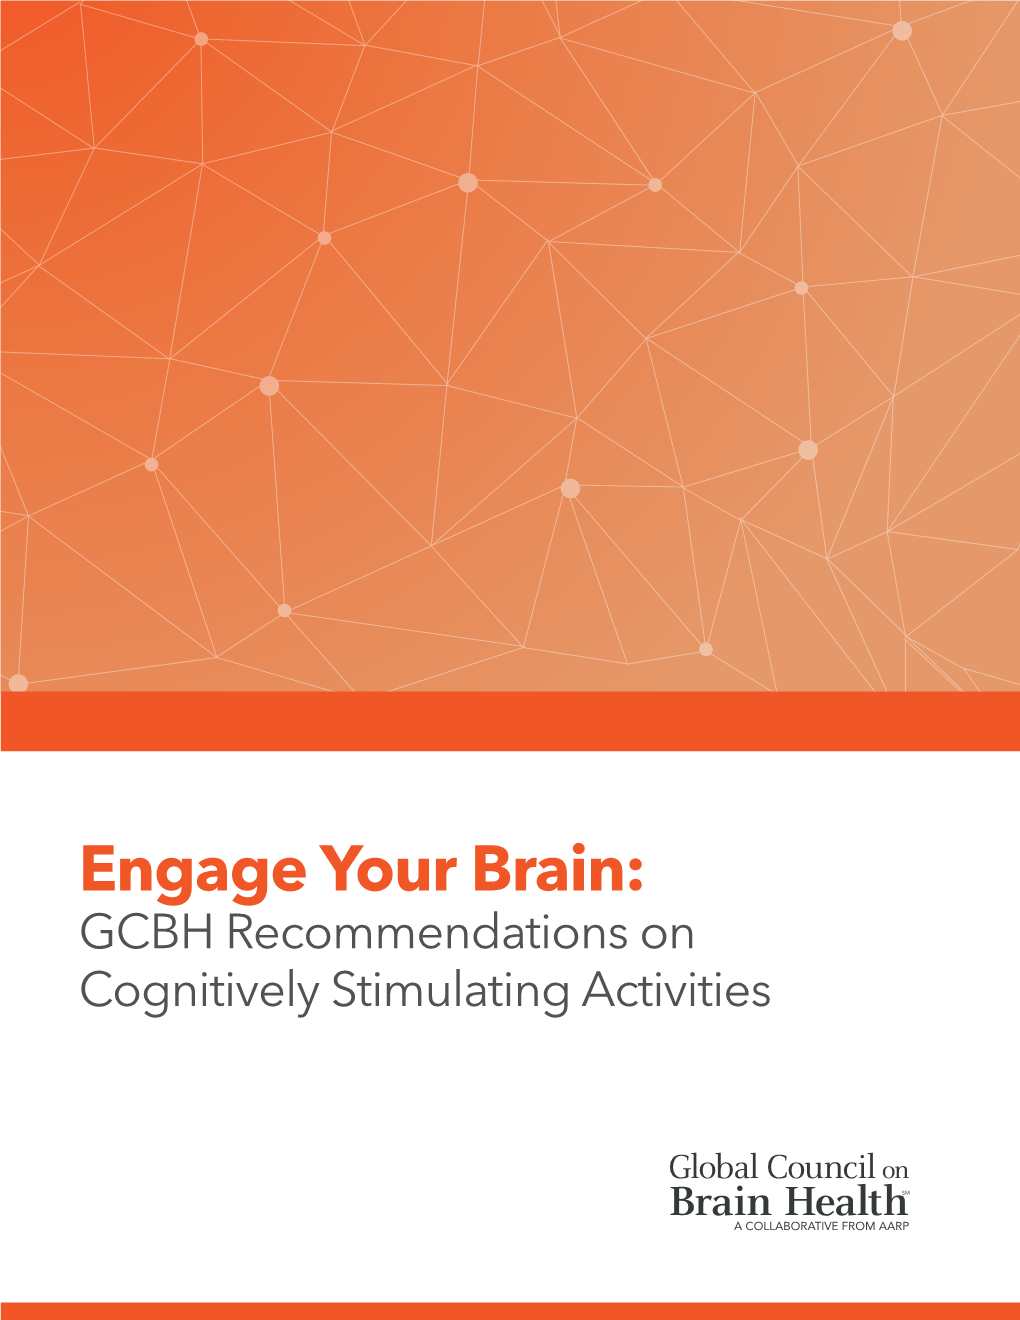 Engage Your Brain: GCBH Recommendations on Cognitively Stimulating Activities BACKGROUND: ABOUT GCBH and ITS WORK